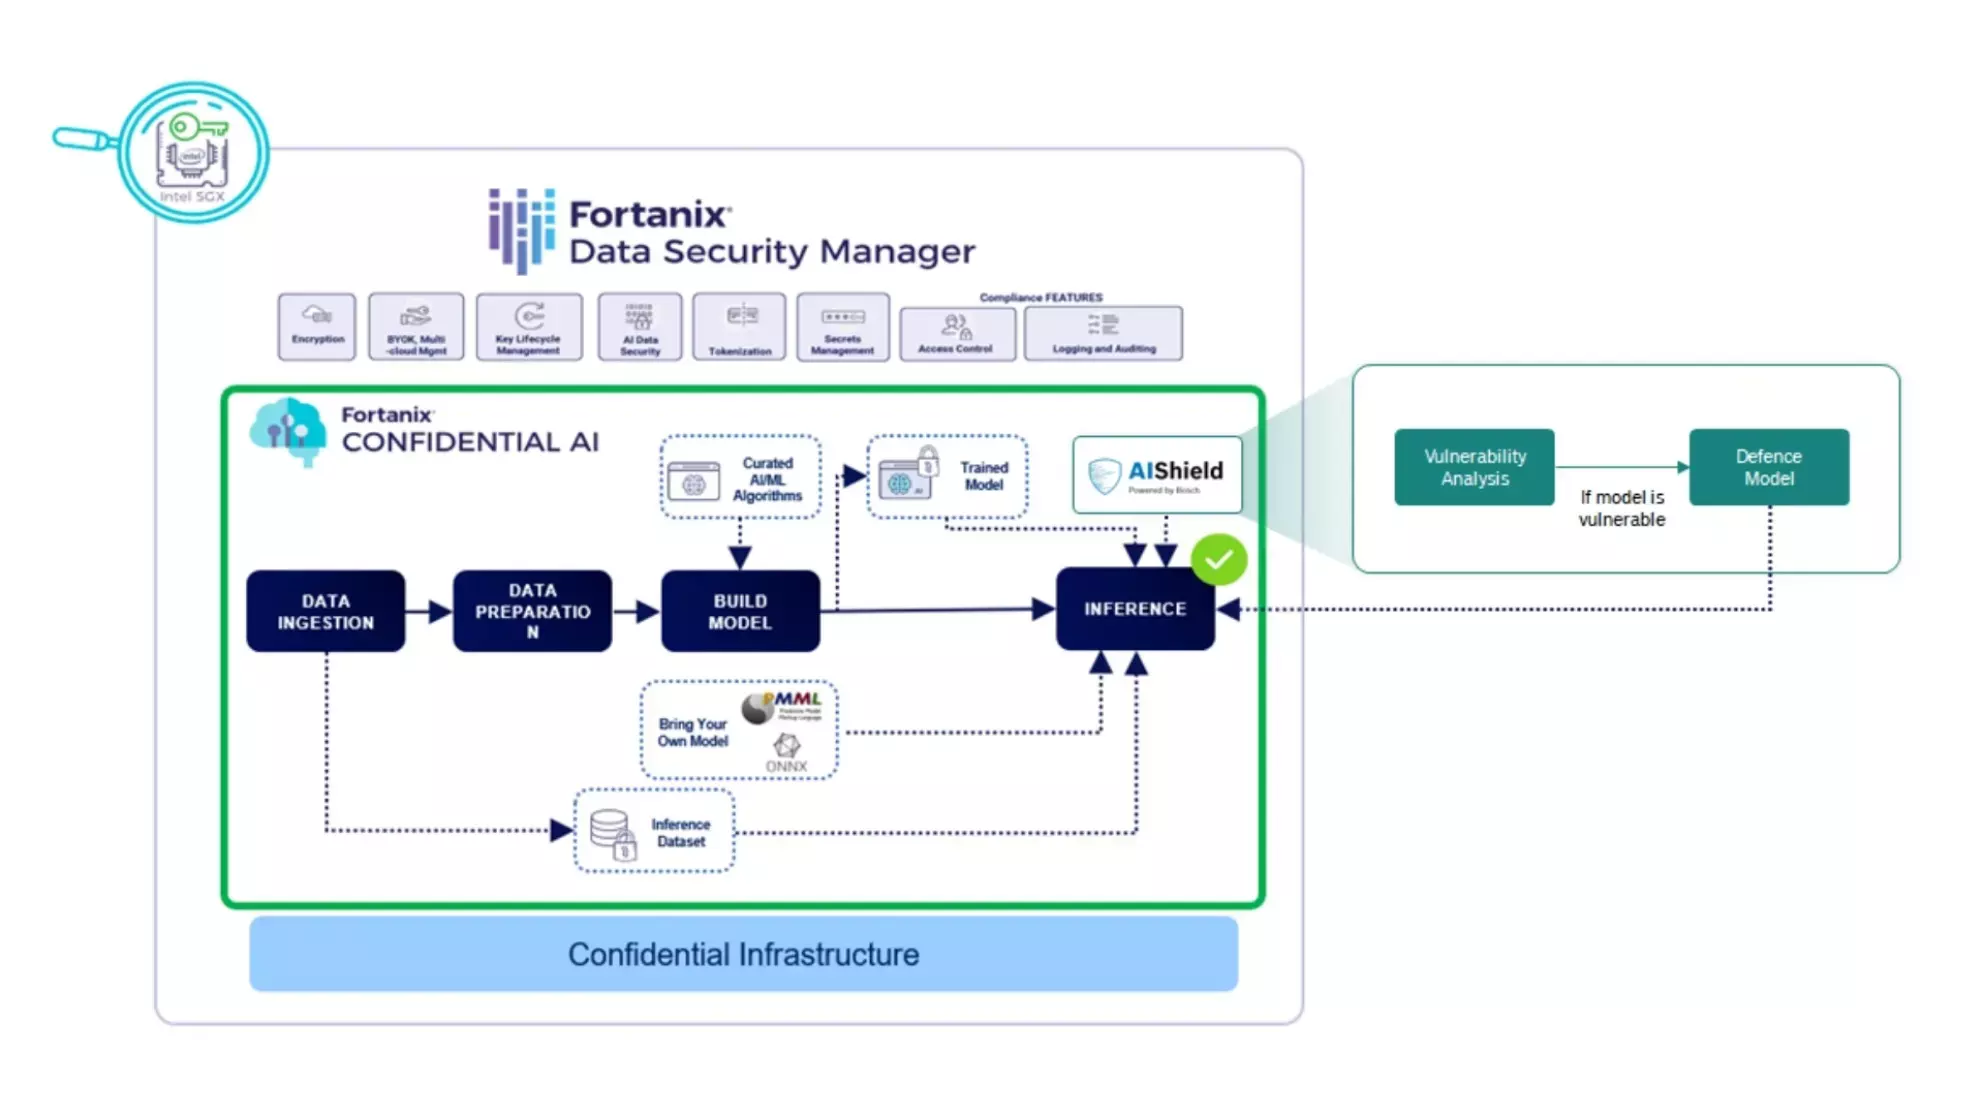 AIShield Defense model within the Fortanix Confidential AI workflow